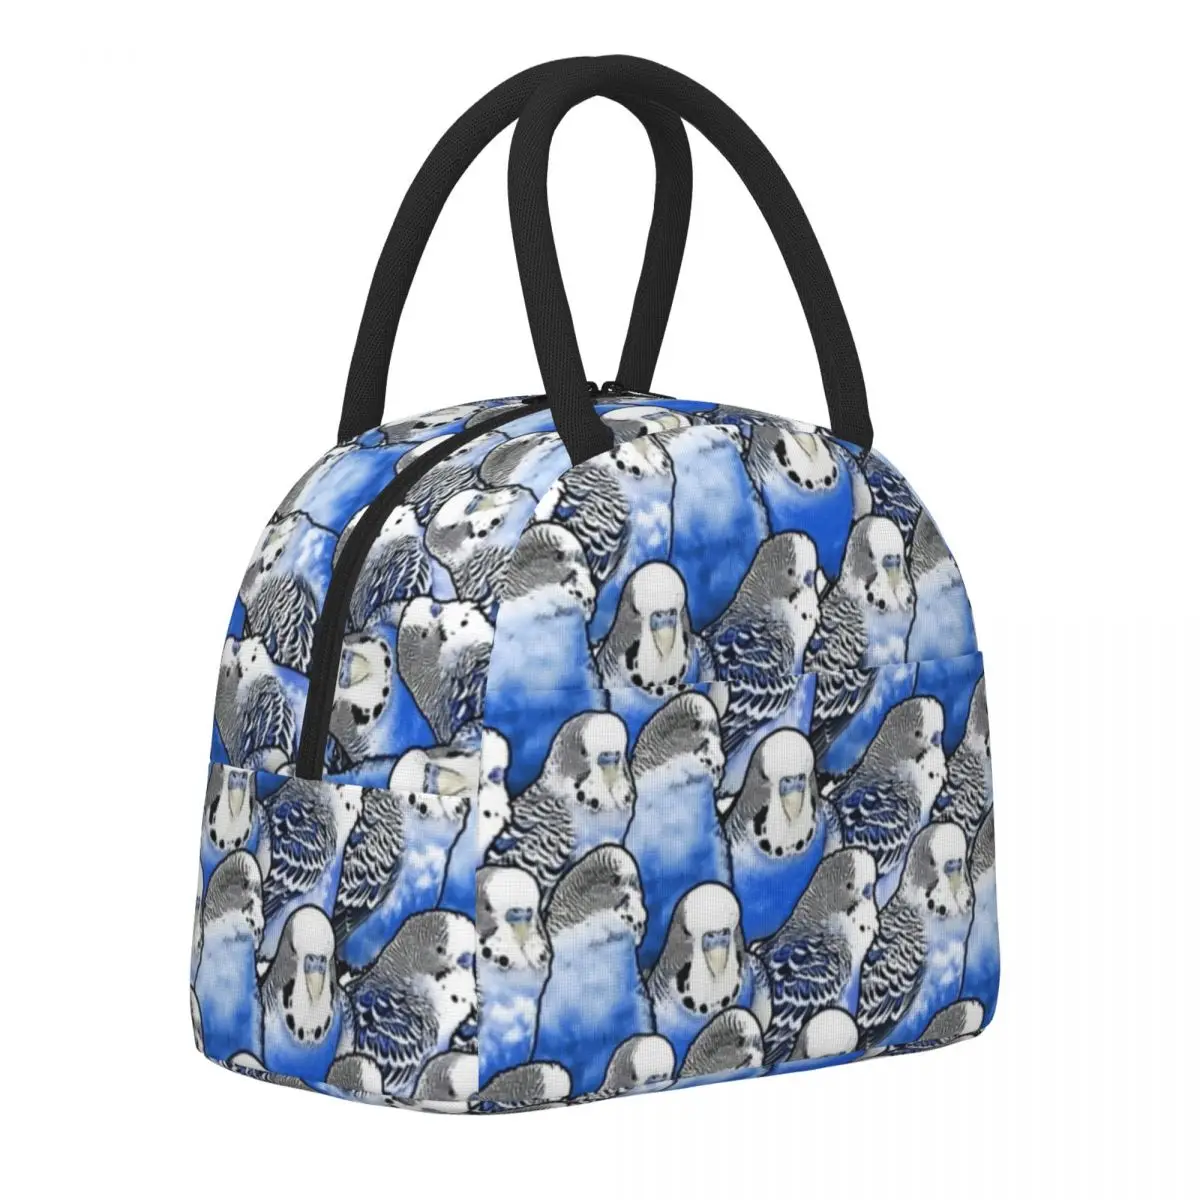 

Cute Birds Meme Lunch Bag Budgie Blue Pattern Casual Lunch Box Picnic Portable Thermal Tote Handbags Oxford Graphic Cooler Bag